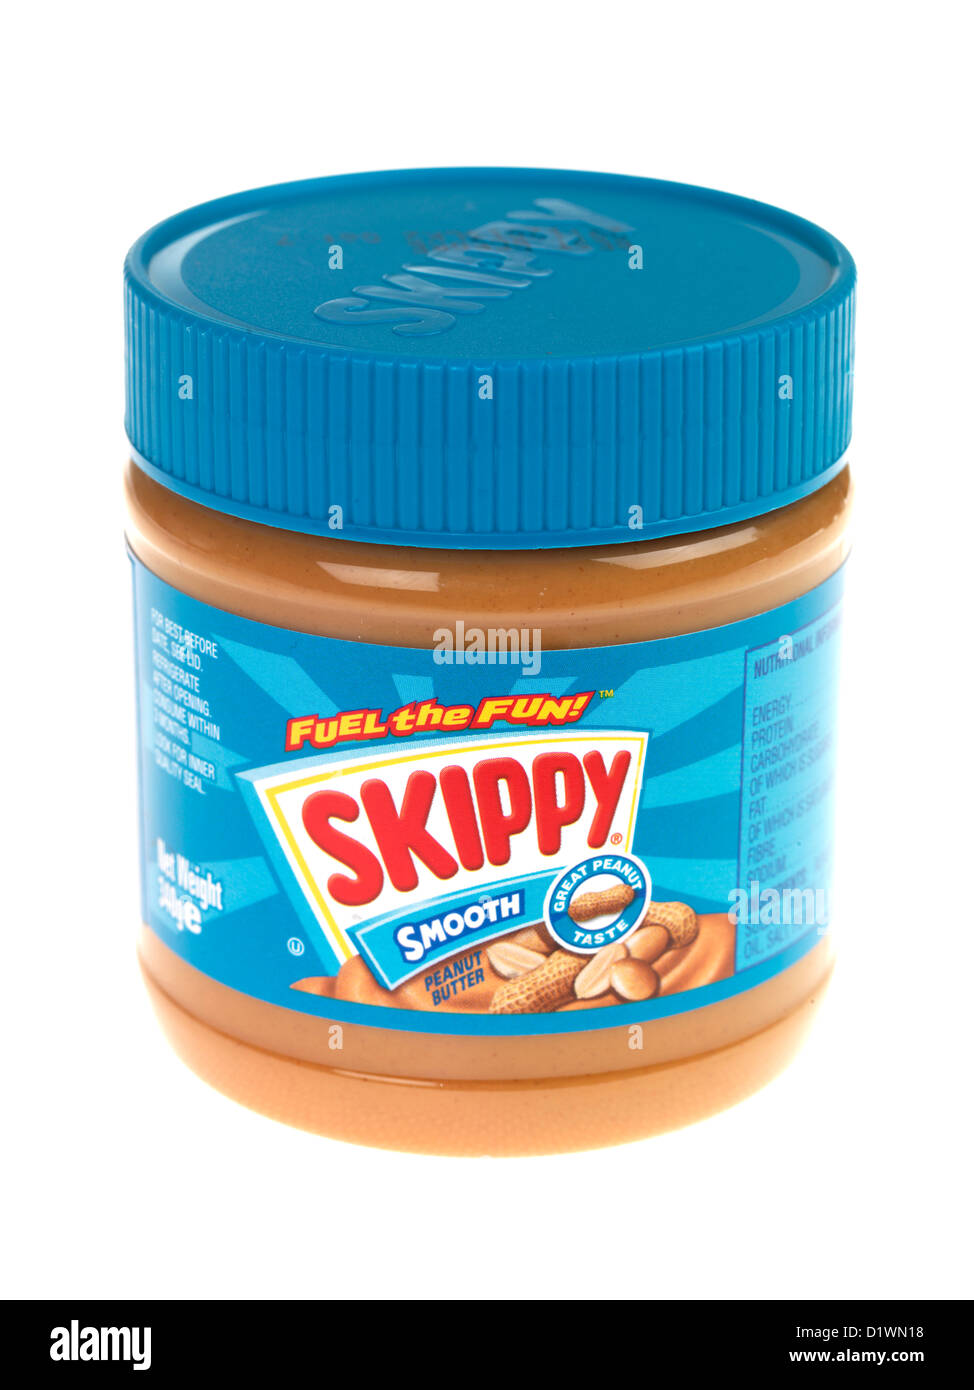 Jar Of Skippy Smooth Peanut Butter In Branded Packaging Isolated Against A White Background With No People And A Clipping Path Stock Photo